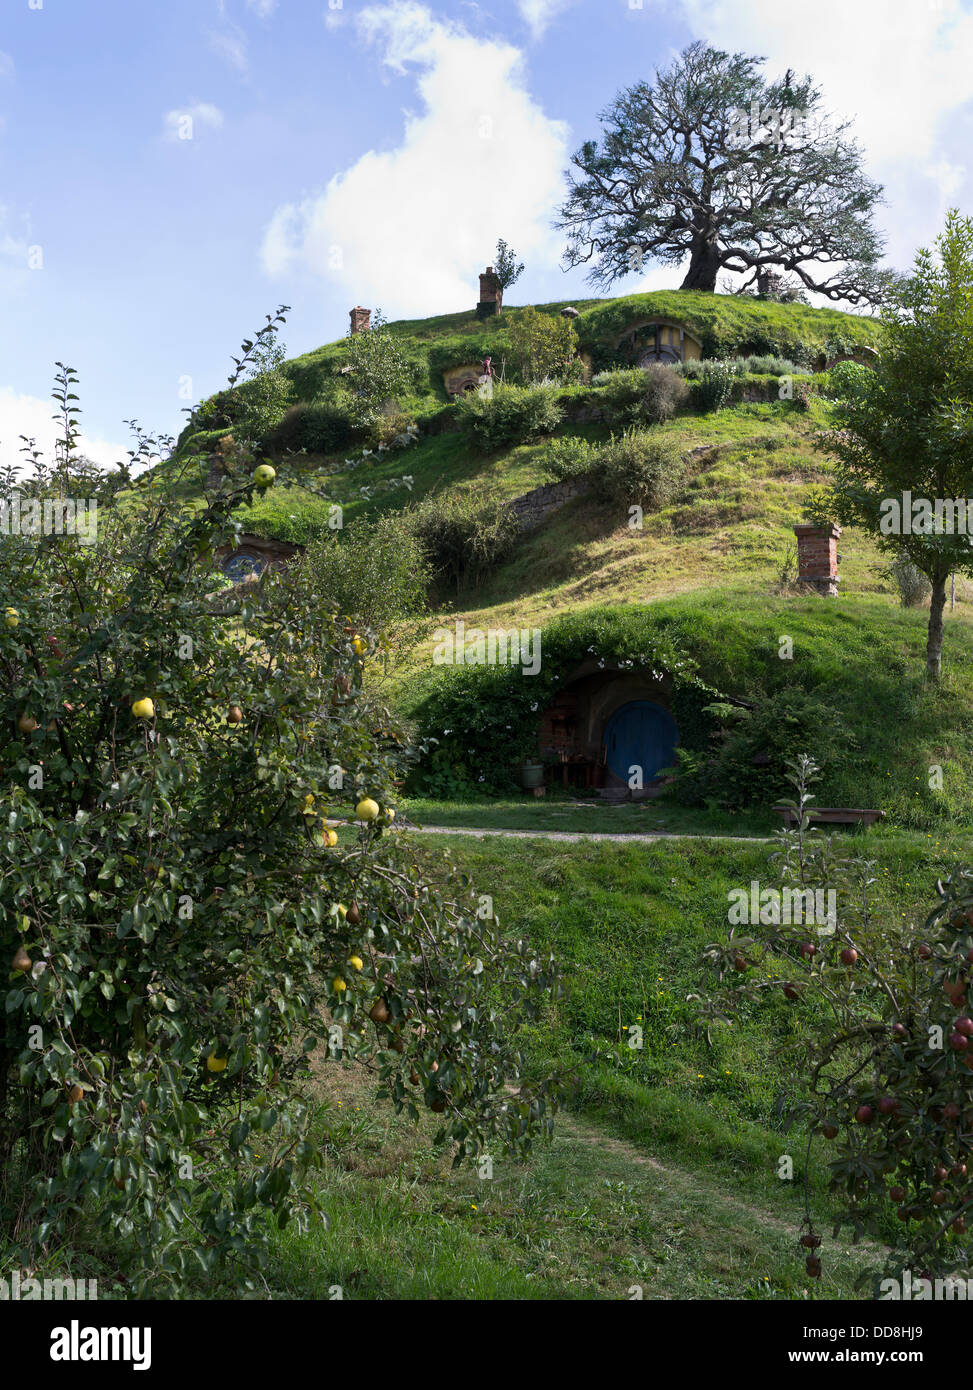 dh Lord of the Rings HOBBITON NEW ZEALAND Hobbits cottages film set movie site films hobbit middle earth homes Stock Photo